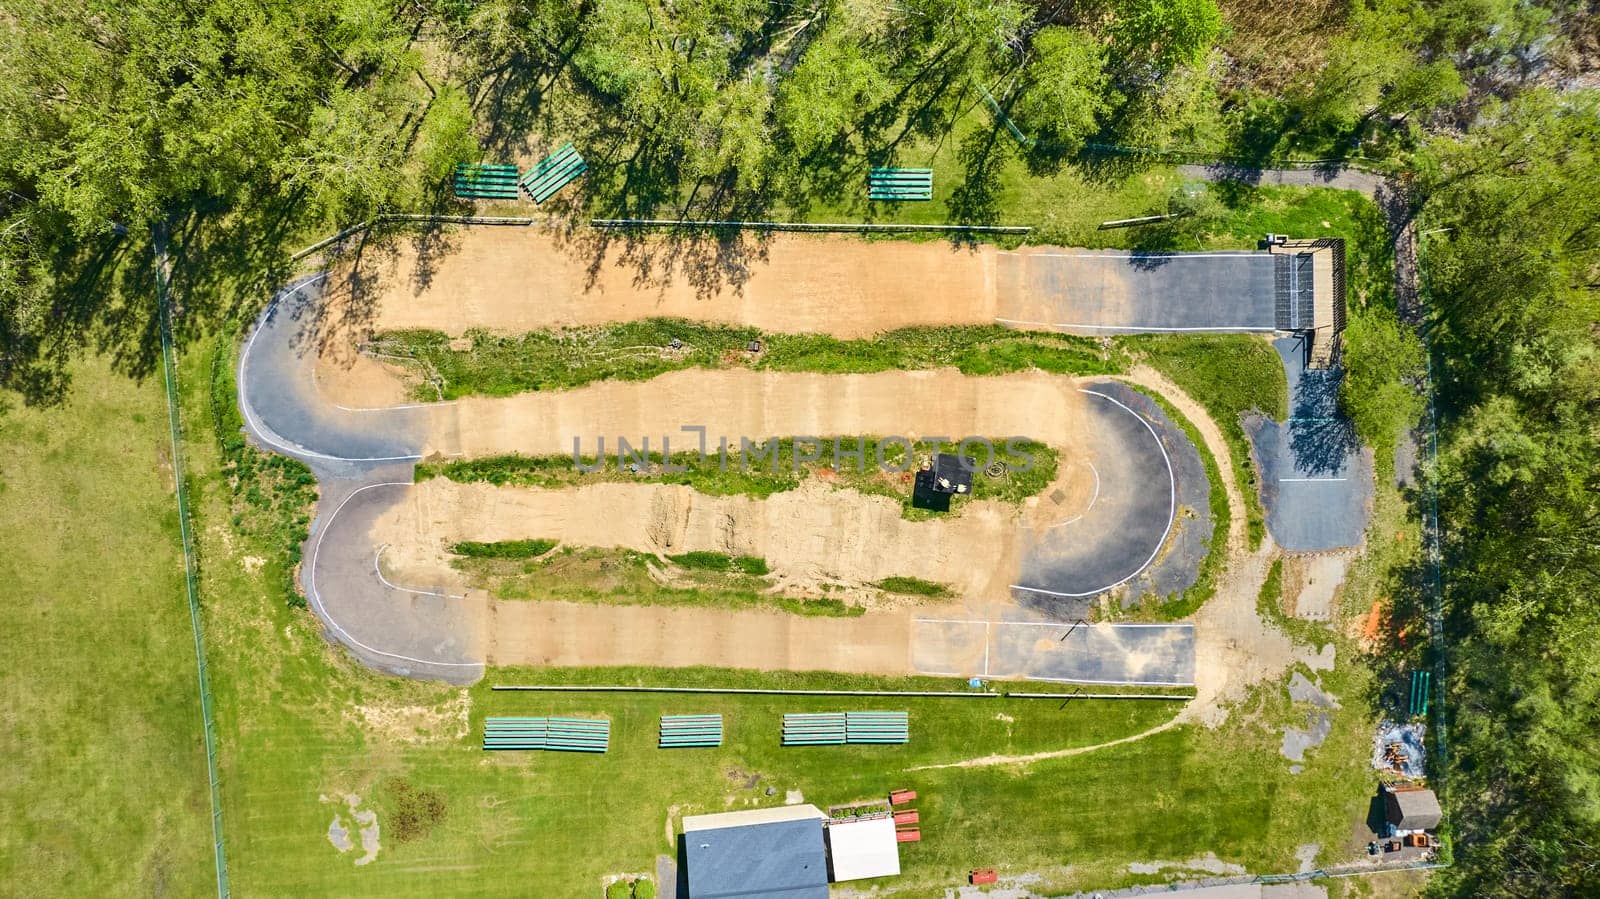 Aerial view of a vibrant park in Warsaw, Indiana, featuring a serpentine BMX track and lush green spaces.